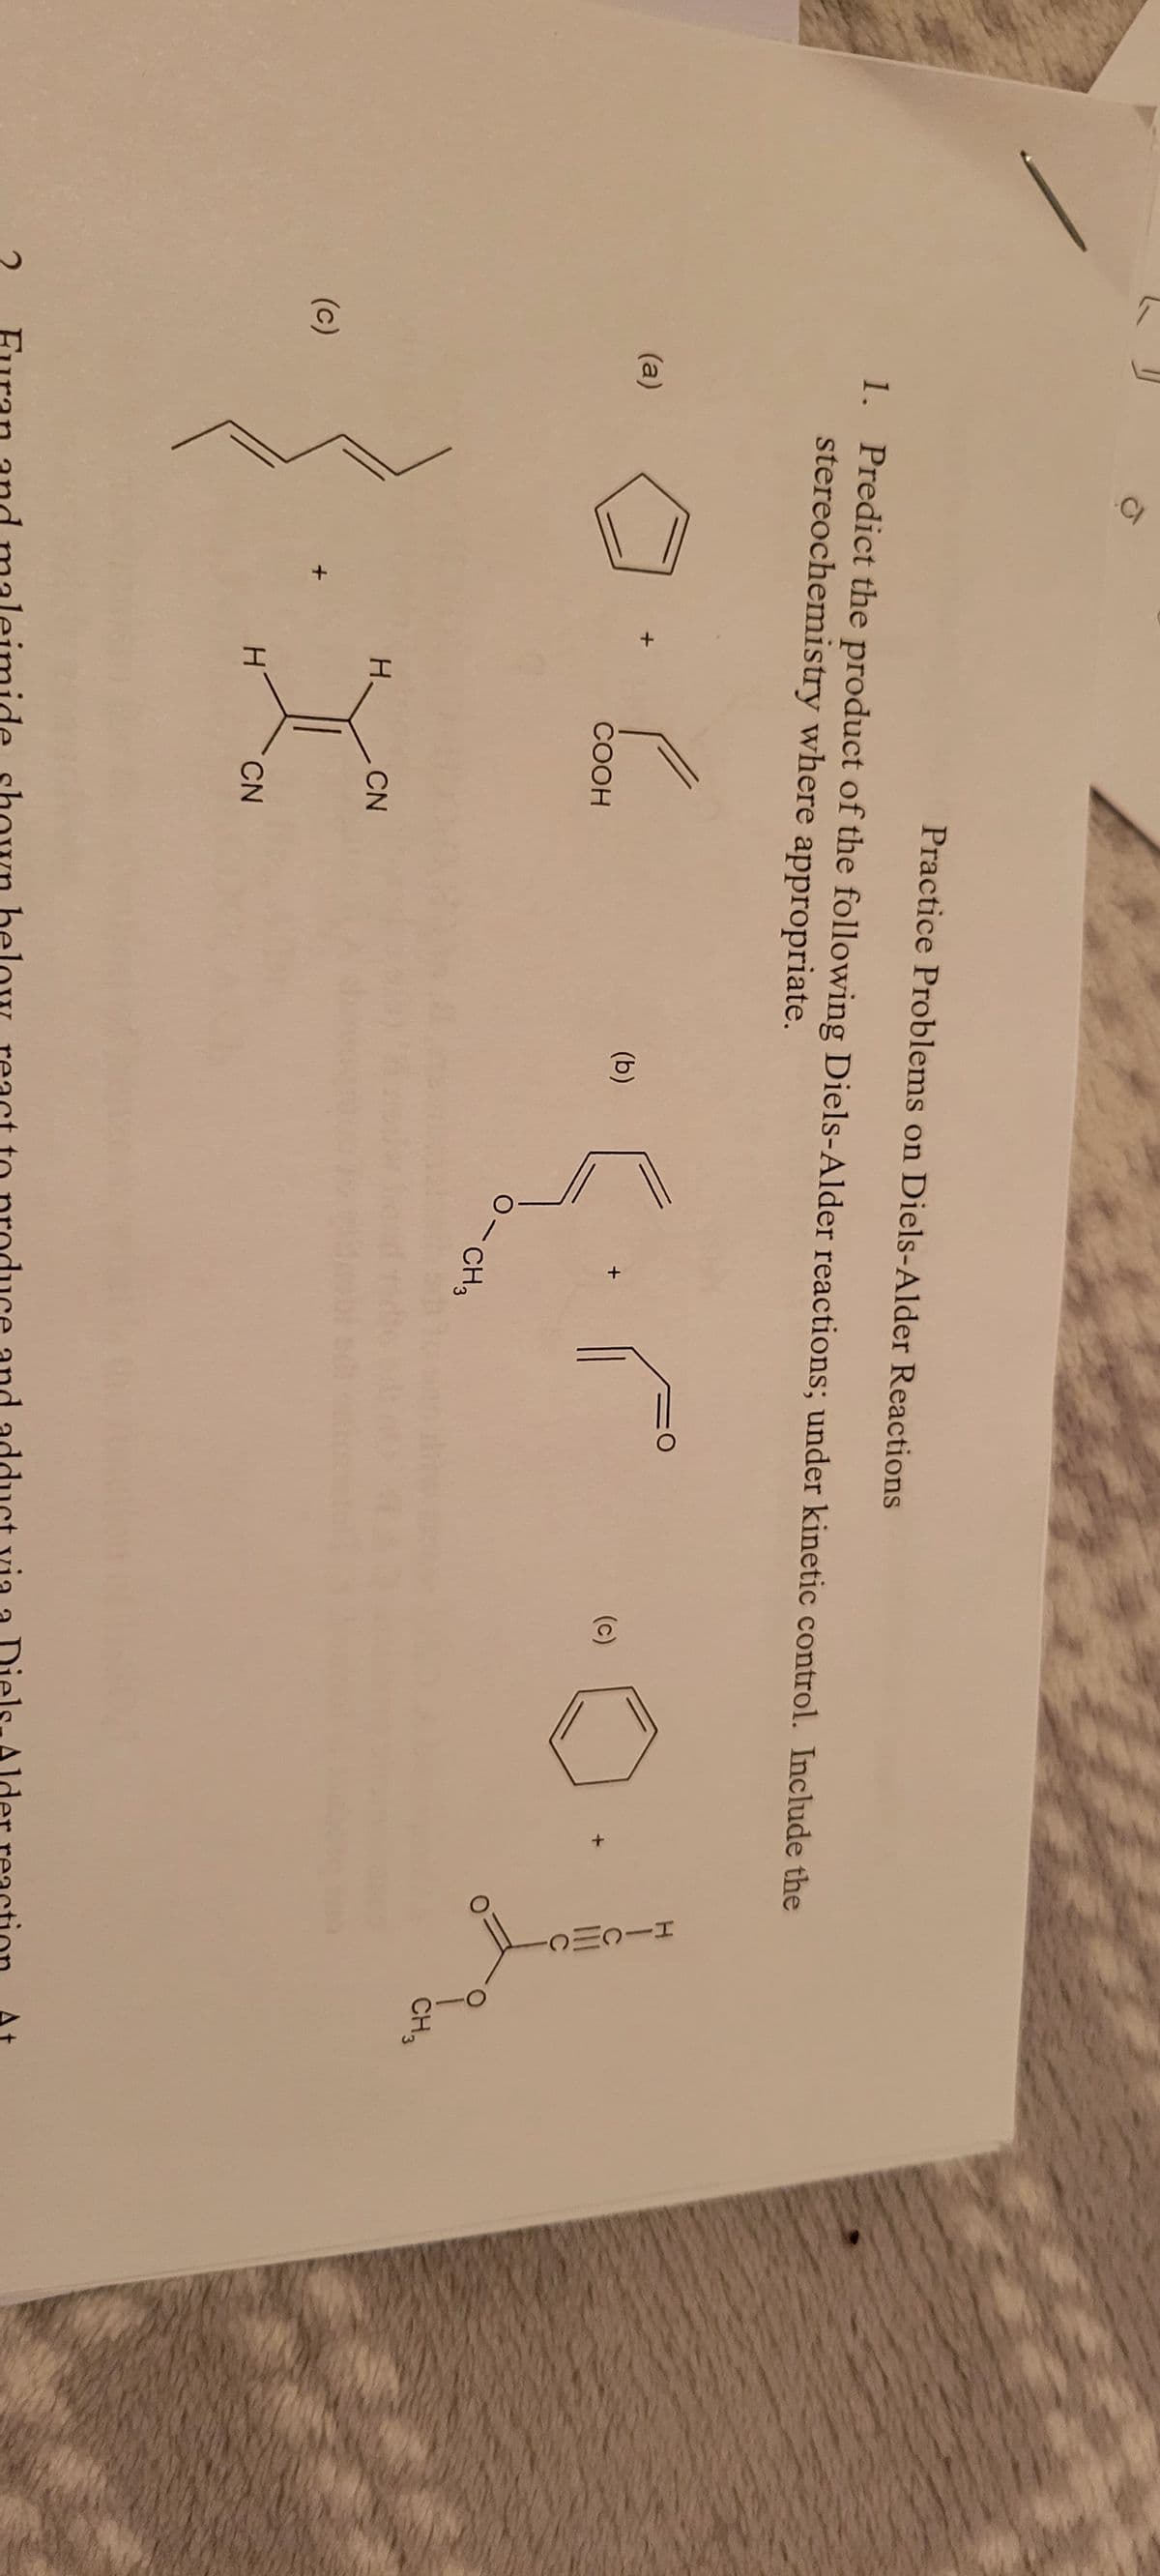 2
(c)
CI
(a)
1. Predict the product of the following Diels-Alder reactions; under kinetic control. Include the
stereochemistry where appropriate.
H.
H
Ca
COOH
CN
Practice Problems on Diels-Alder Reactions
CN
(b)
O-CH3
(c)
HICMC
Furan and maleimide shown below react to produce and adduct via a Diels-Alder reaction
CH3
At